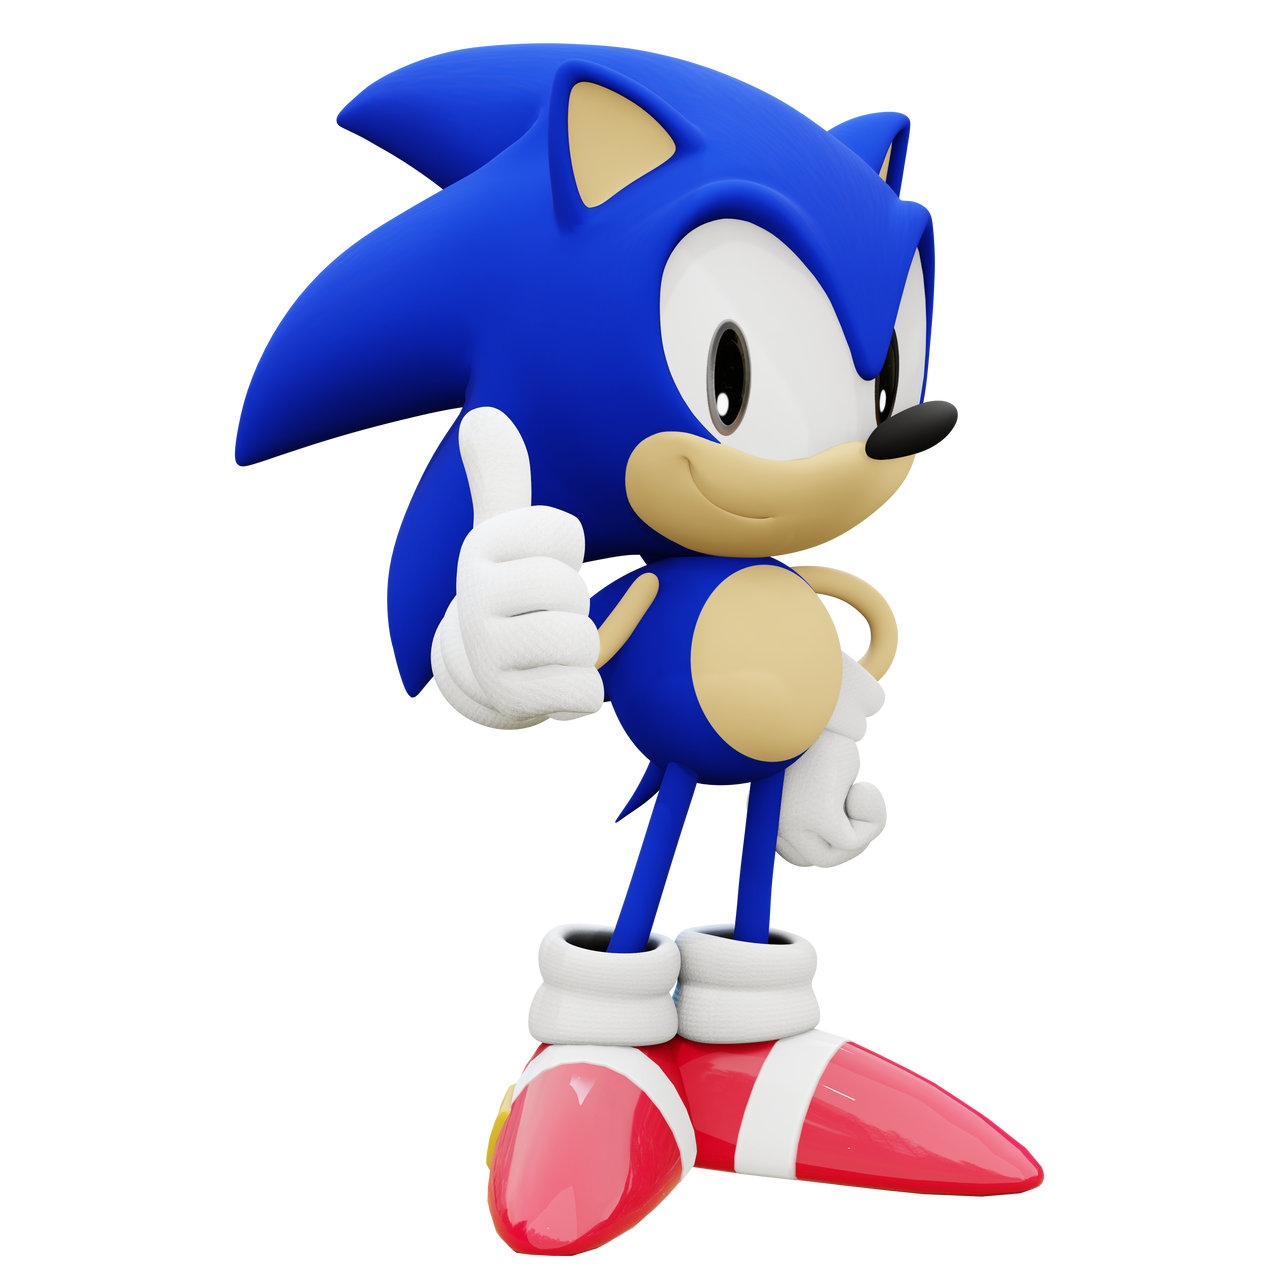 Classic Sonic Render DX by Peppermint08 on DeviantArt